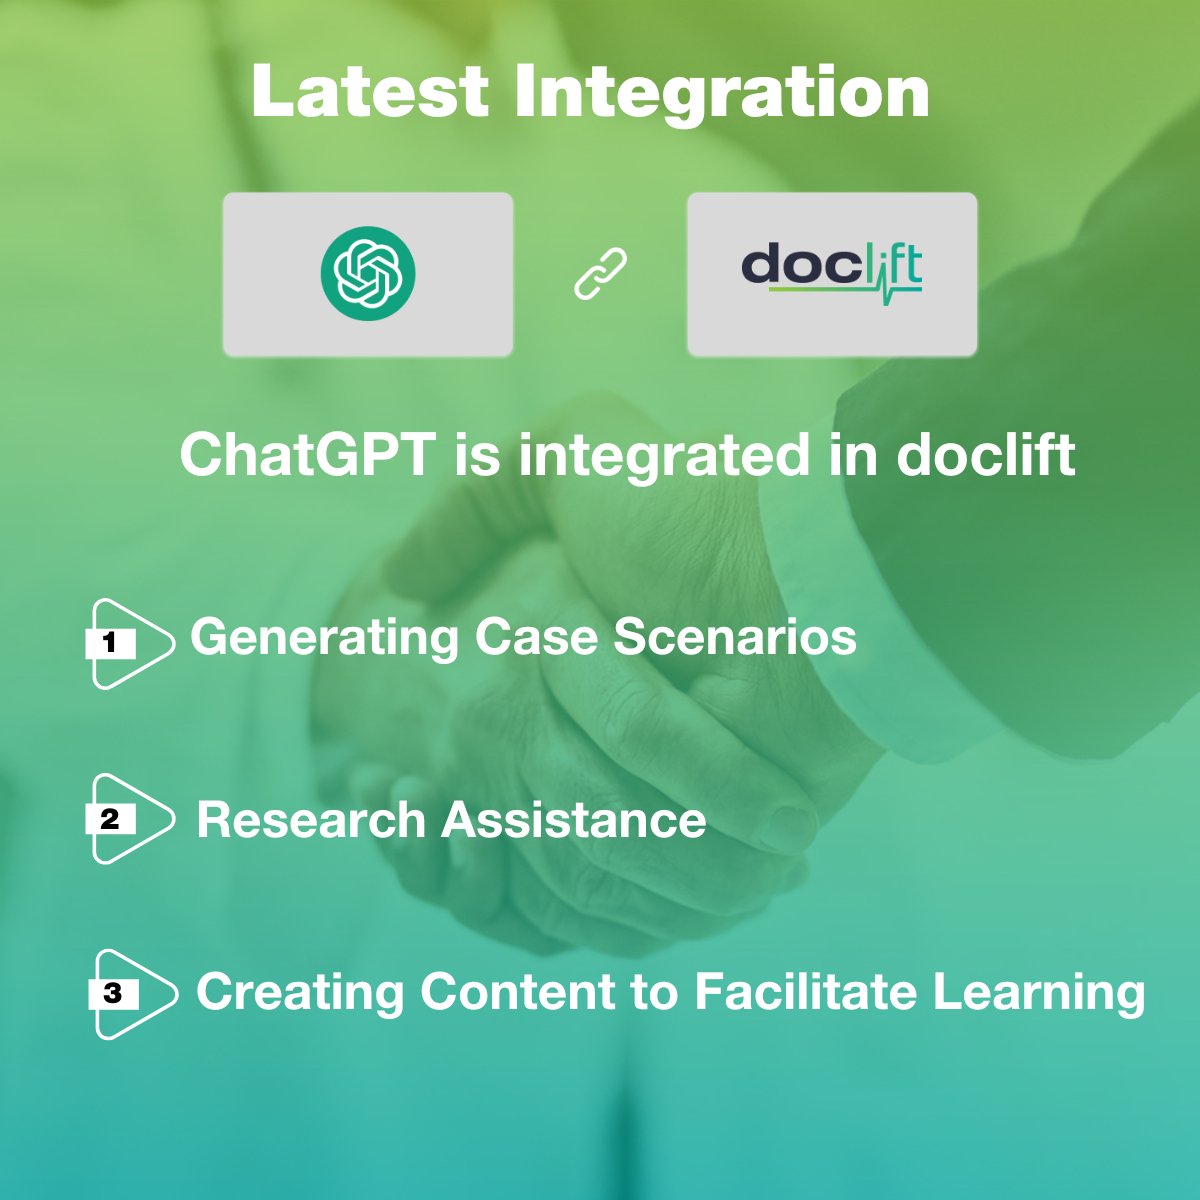 Did you know that doclift integrated ChatGPT?

#ai #technology #artificialintelligence #tech #machinelearning
#medicaleducation #medicaltraining #medicalevents #onlinemedicalconferences #healthcare #medicalsoftware #DigitalHealth  #PatientEngagement #HealthcareAI #chatgpt